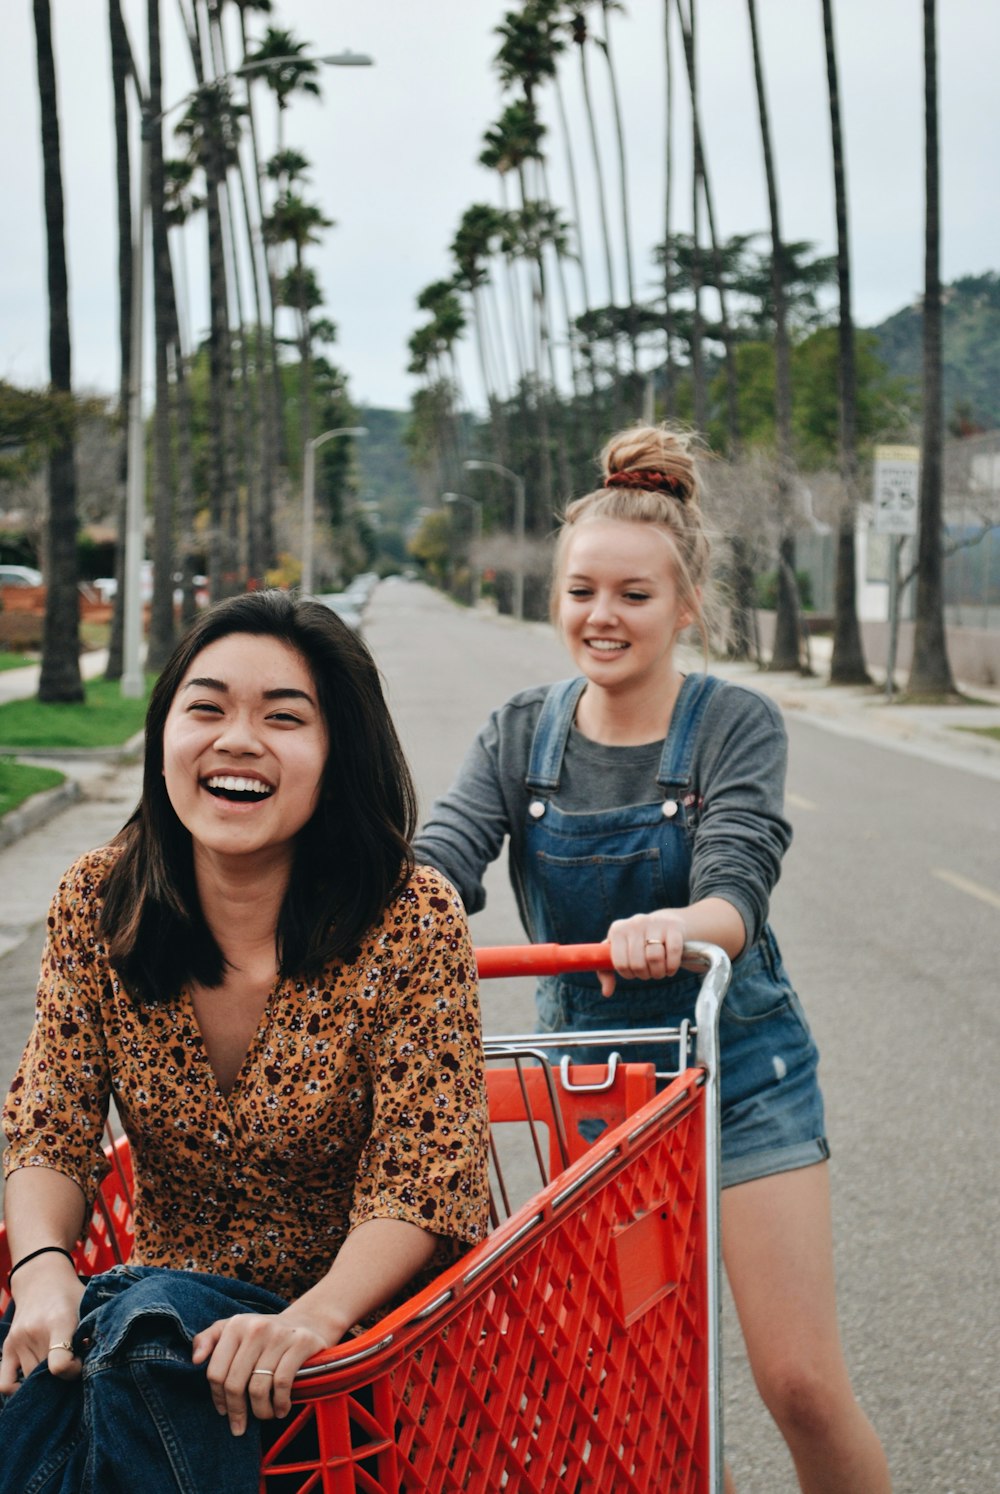 two women riding on shopping cart on road between trees during daytime